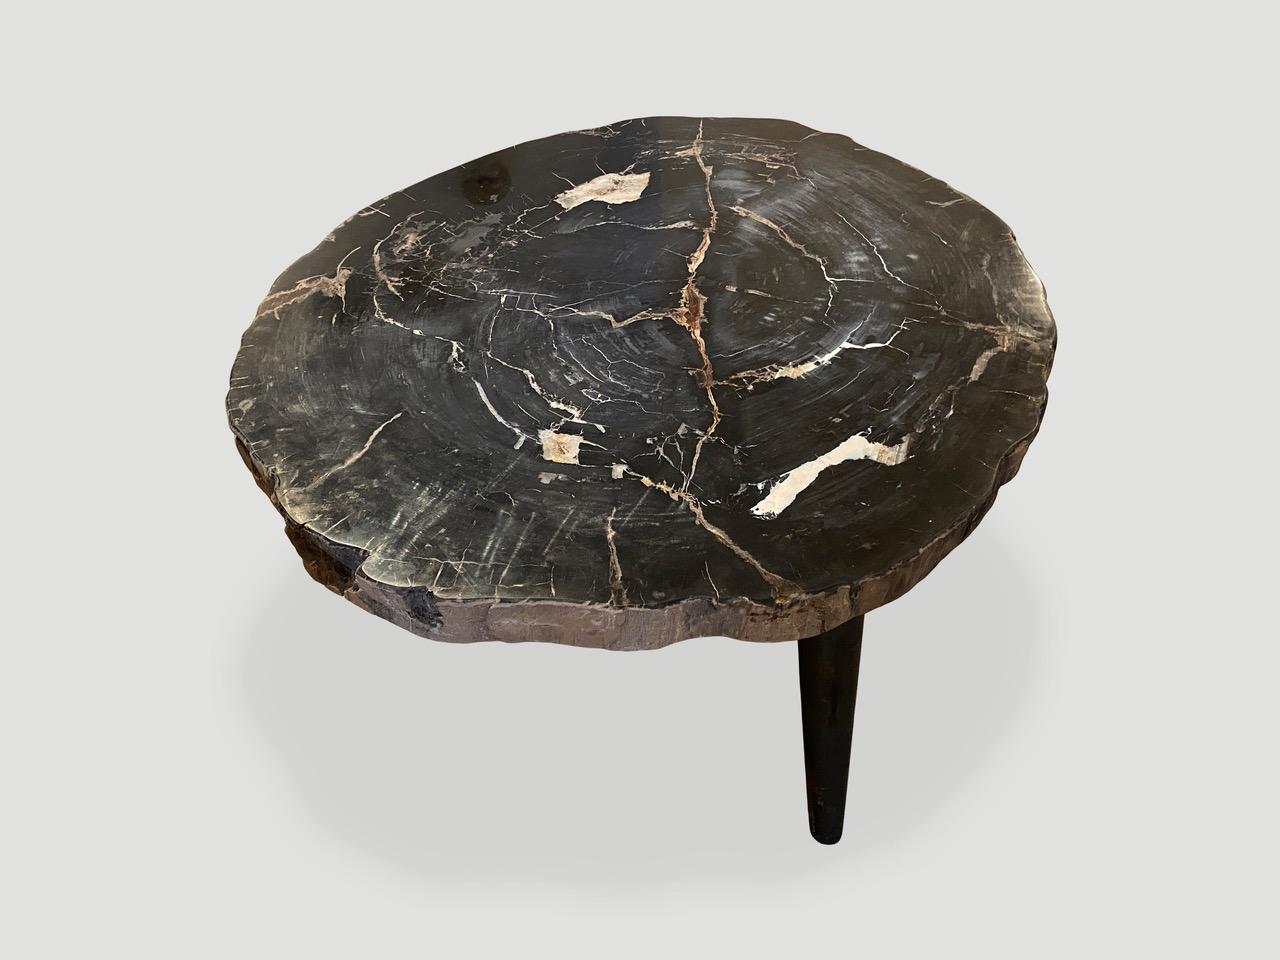 Stunning rare blue black tones on this petrified wood three inch slab coffee table. This large impressive slab is resting on a mid century style burnt metal base. Contrasting white markings and natural crystals are embedded on the top. We polished